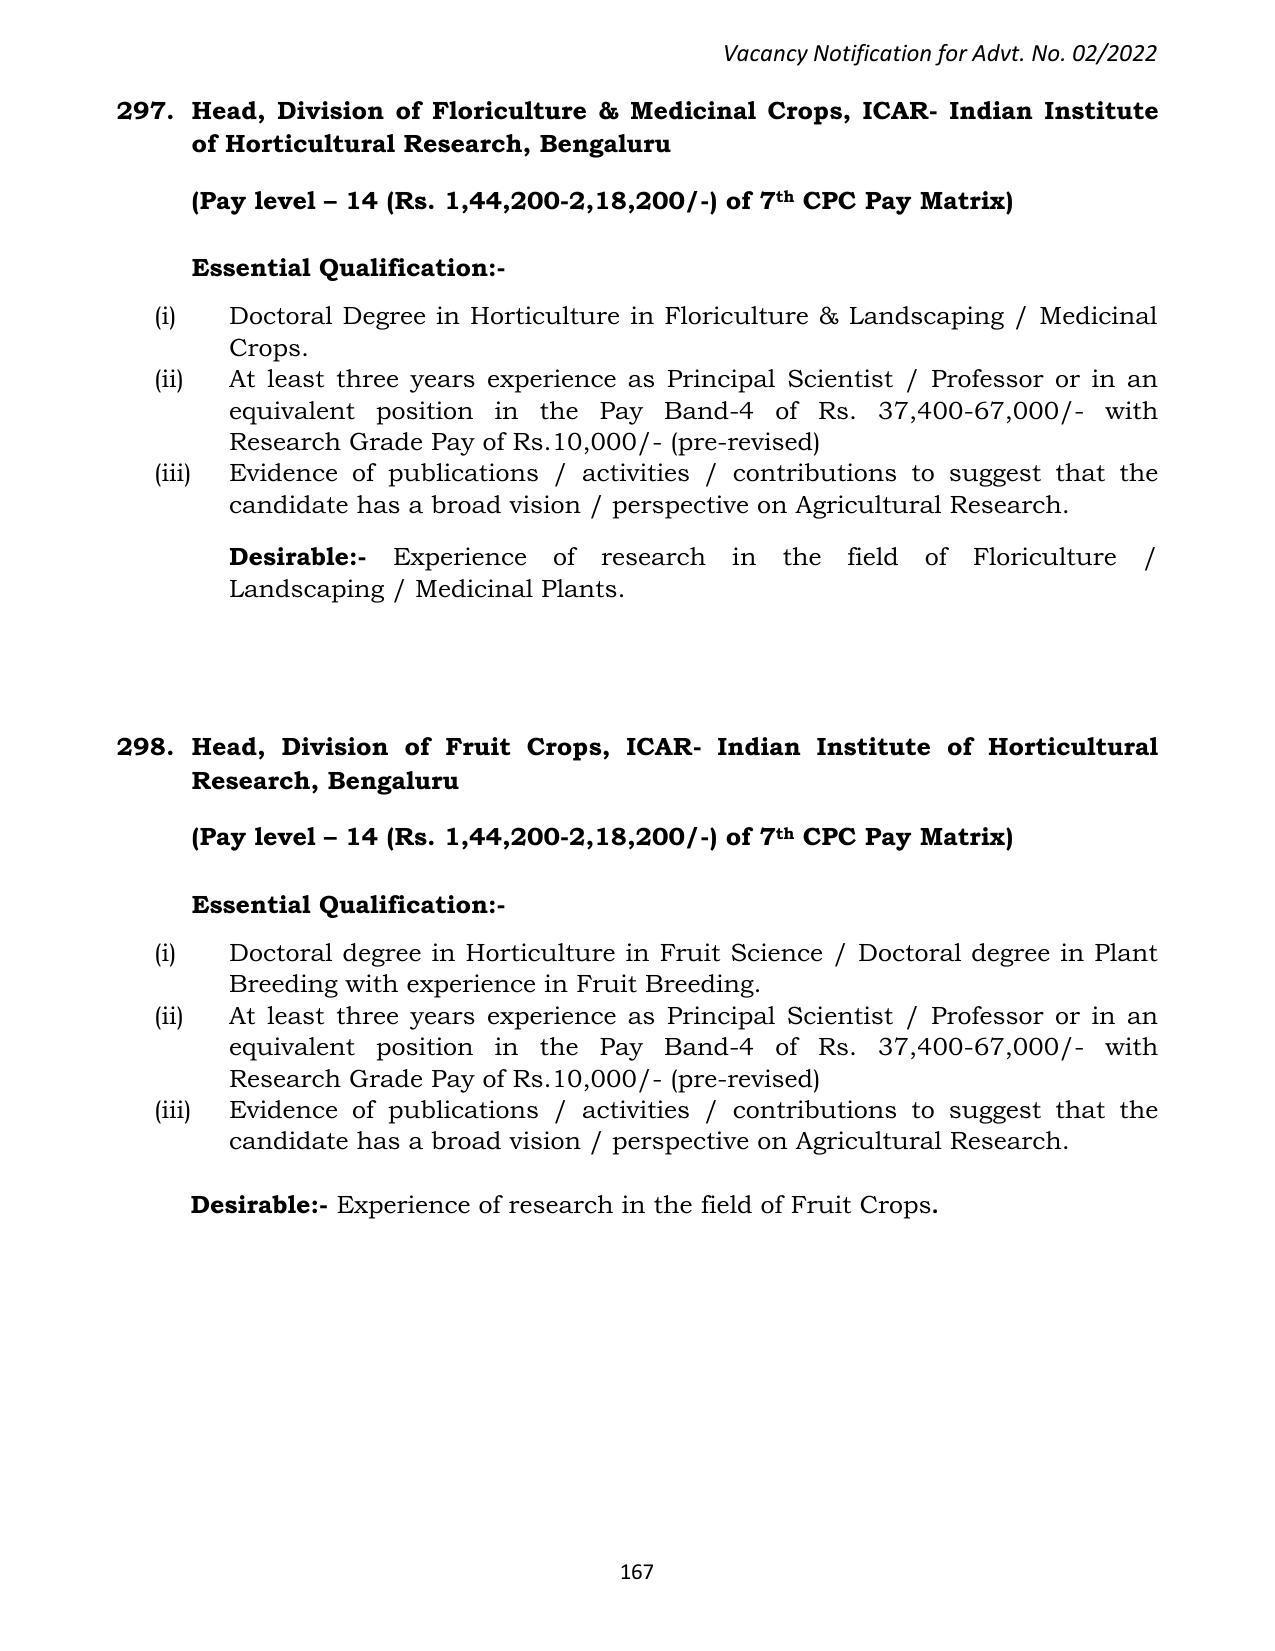 ASRB Non-Research Management Recruitment 2022 - Page 115